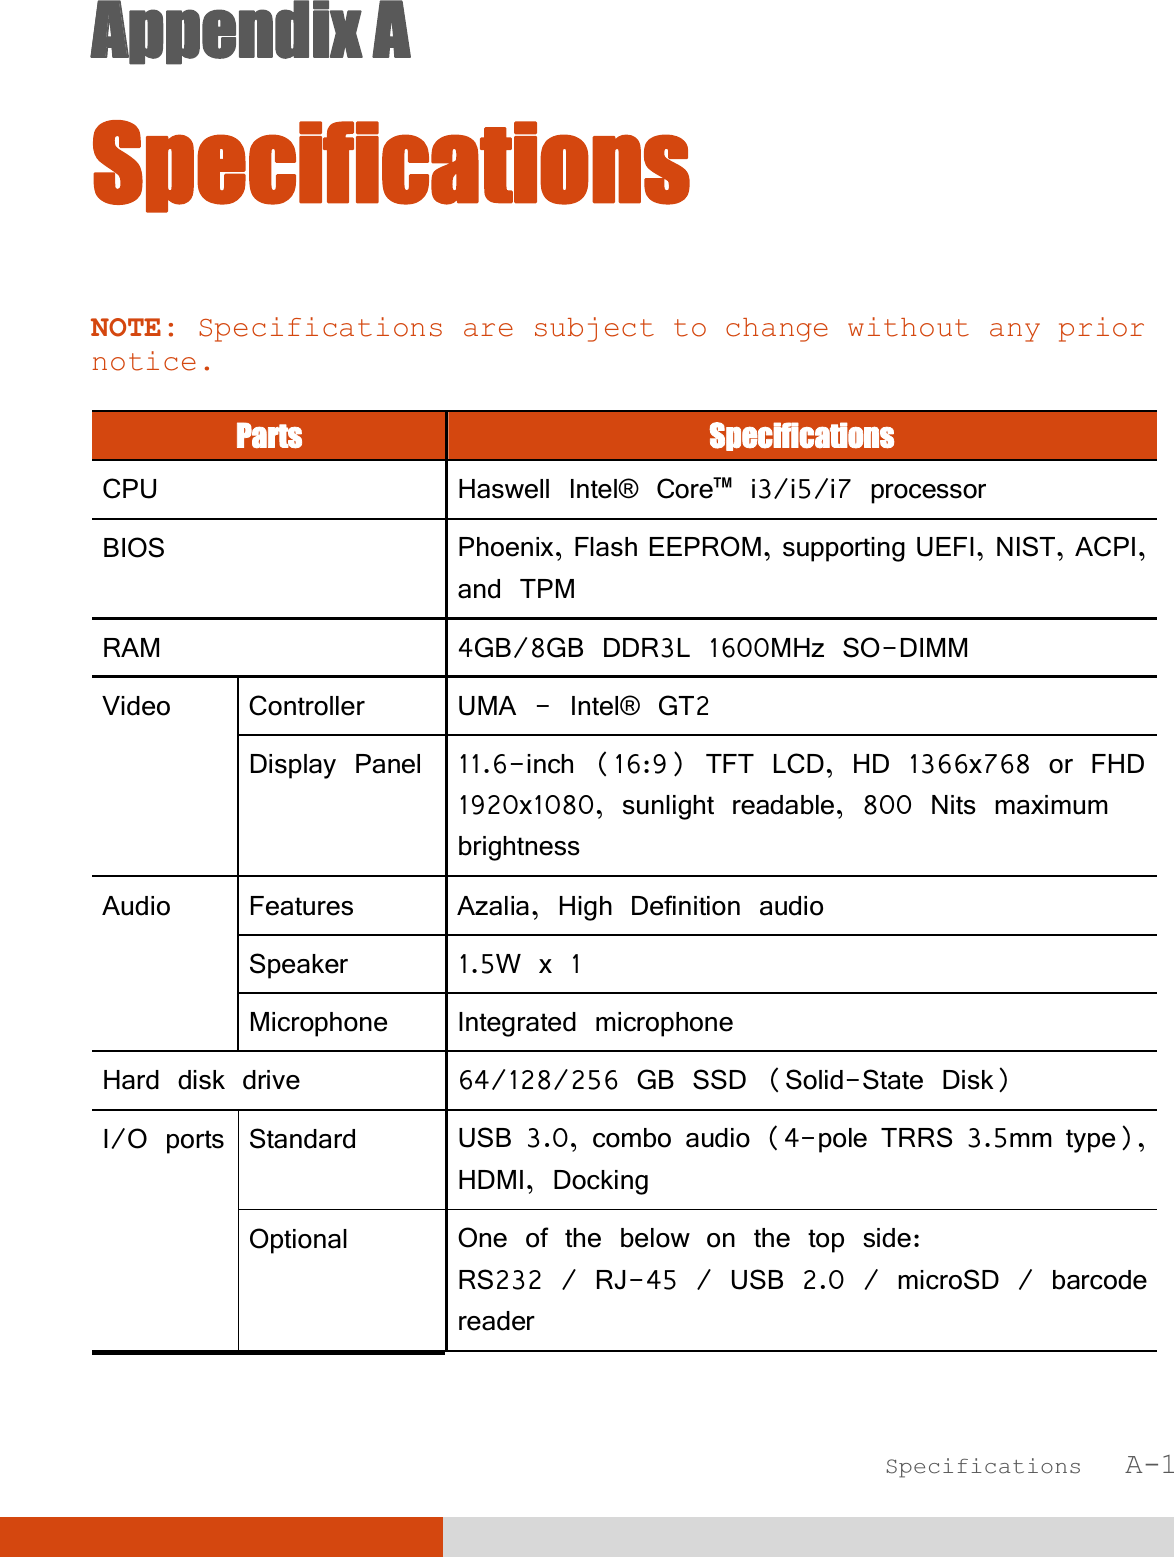  Specifications   A-1 AAppendix A Specifications NOTE: Specifications are subject to change without any prior notice.  Parts  Specifications CPU  Haswell Intel® Core™ i3/i5/i7 processor BIOS  Phoenix, Flash EEPROM, supporting UEFI, NIST, ACPI, and TPM RAM   4GB/8GB DDR3L 1600MHz SO-DIMM Video Controller  UMA - Intel® GT2 Display Panel 11.6-inch (16:9) TFT LCD, HD 1366x768 or FHD 1920x1080, sunlight readable, 800 Nits maximum brightness Audio  Features  Azalia, High Definition audio Speaker 1.5W x 1 Microphone Integrated microphone Hard disk drive  64/128/256 GB SSD (Solid-State Disk) I/O ports Standard  USB 3.0, combo audio (4-pole TRRS 3.5mm type), HDMI, Docking Optional  One of the below on the top side: RS232 / RJ-45 / USB 2.0 / microSD / barcode reader  